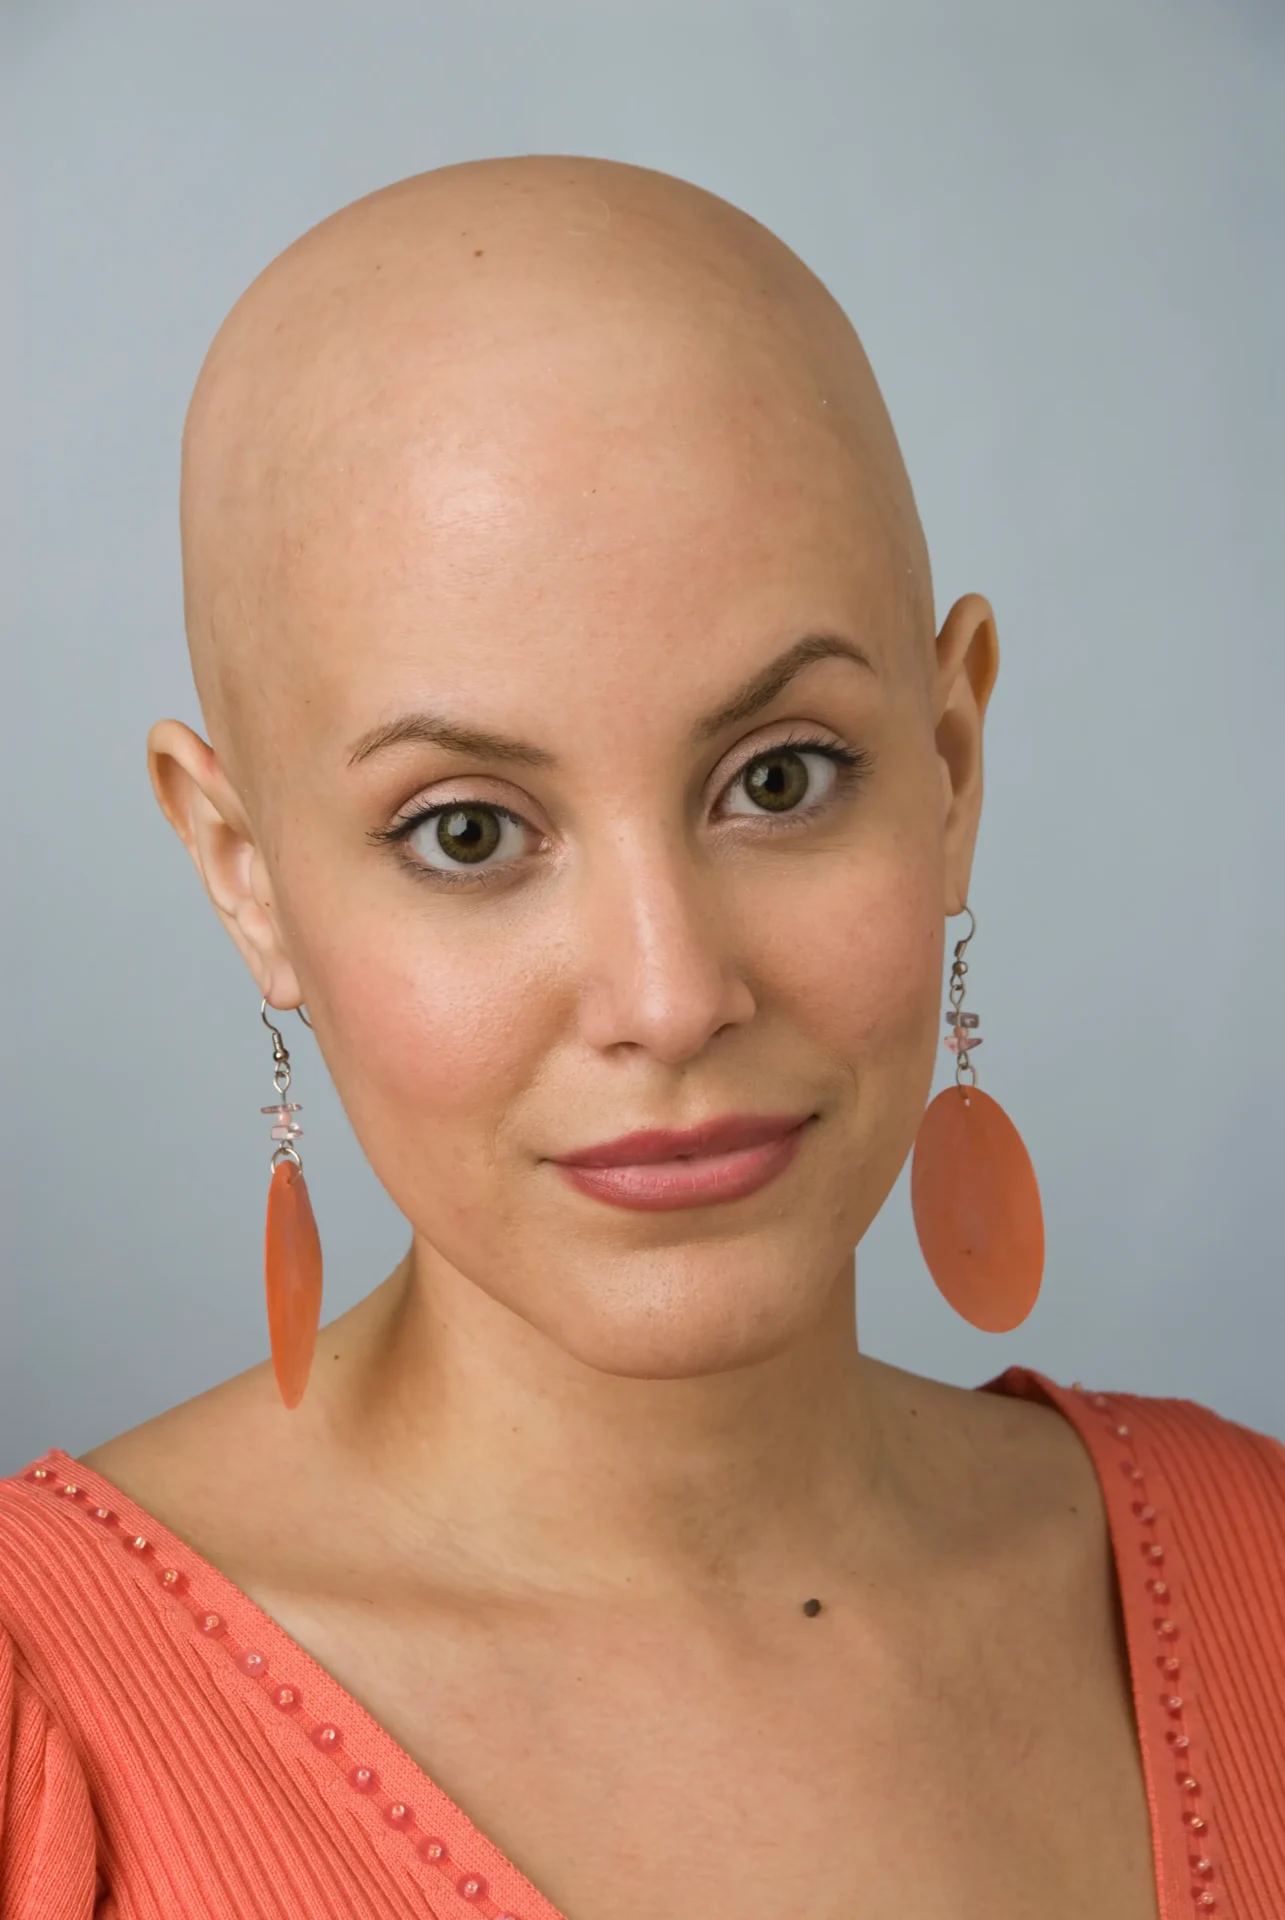 A Bald Woman in an Orange Color Outfit